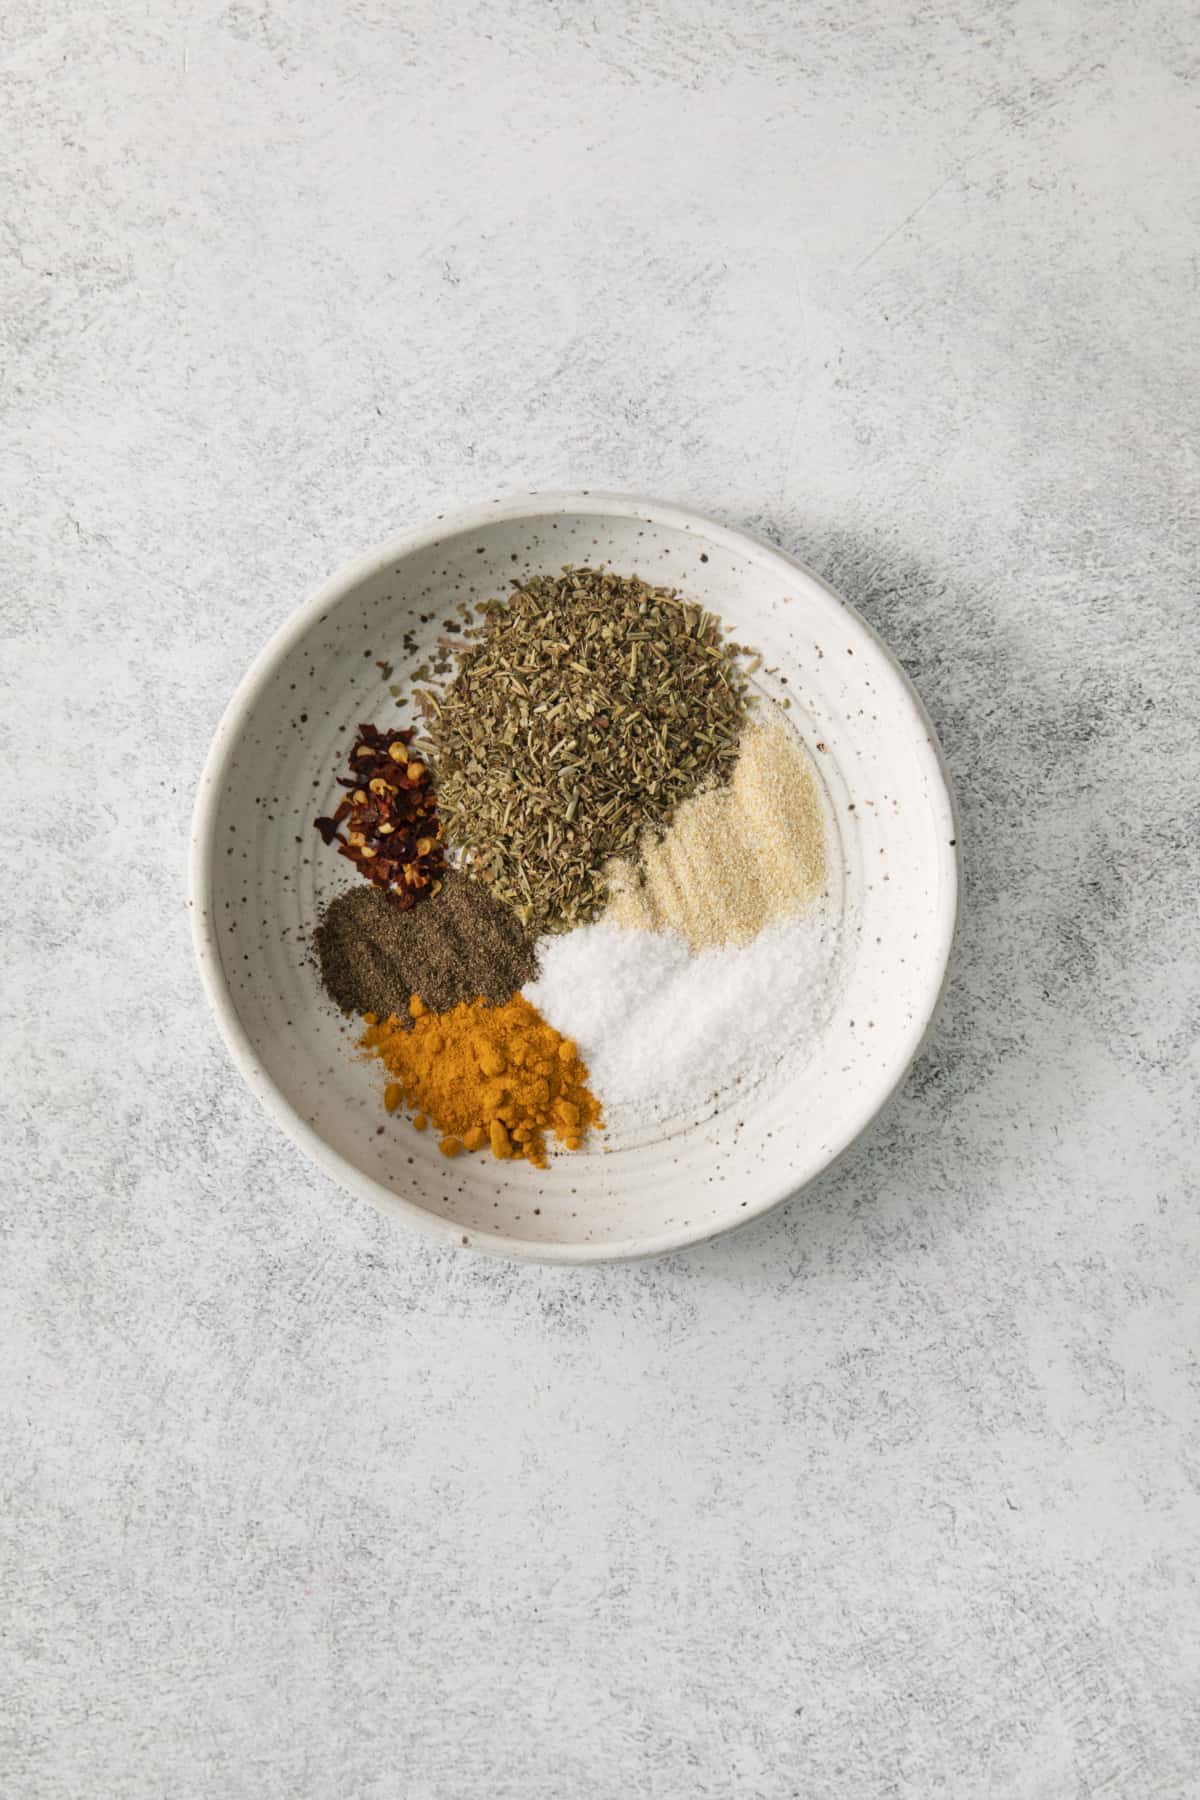 Mix all the spices separately in a bowl to dry them.